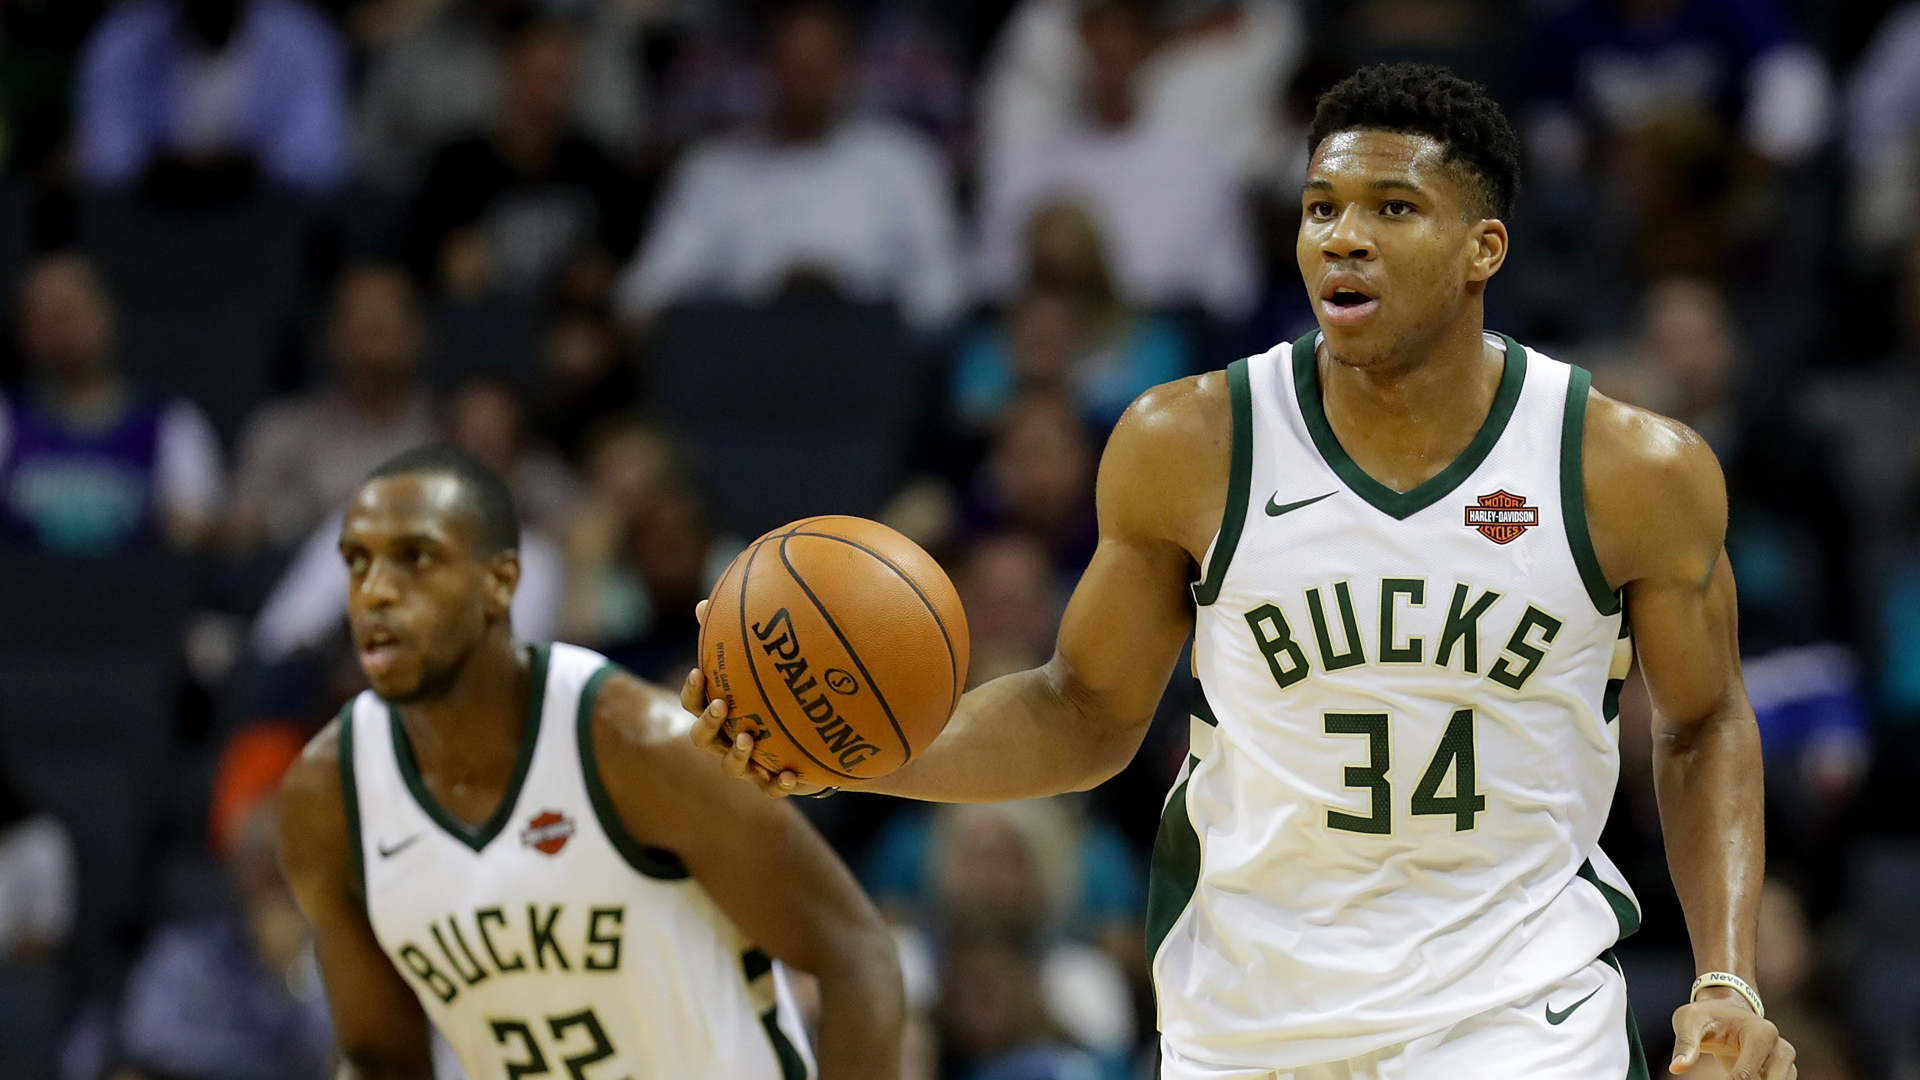 Khris Middleton and Brook Lopez have the utmost respect for Giannis Antetokounmpo and they would not mind facing off with him.